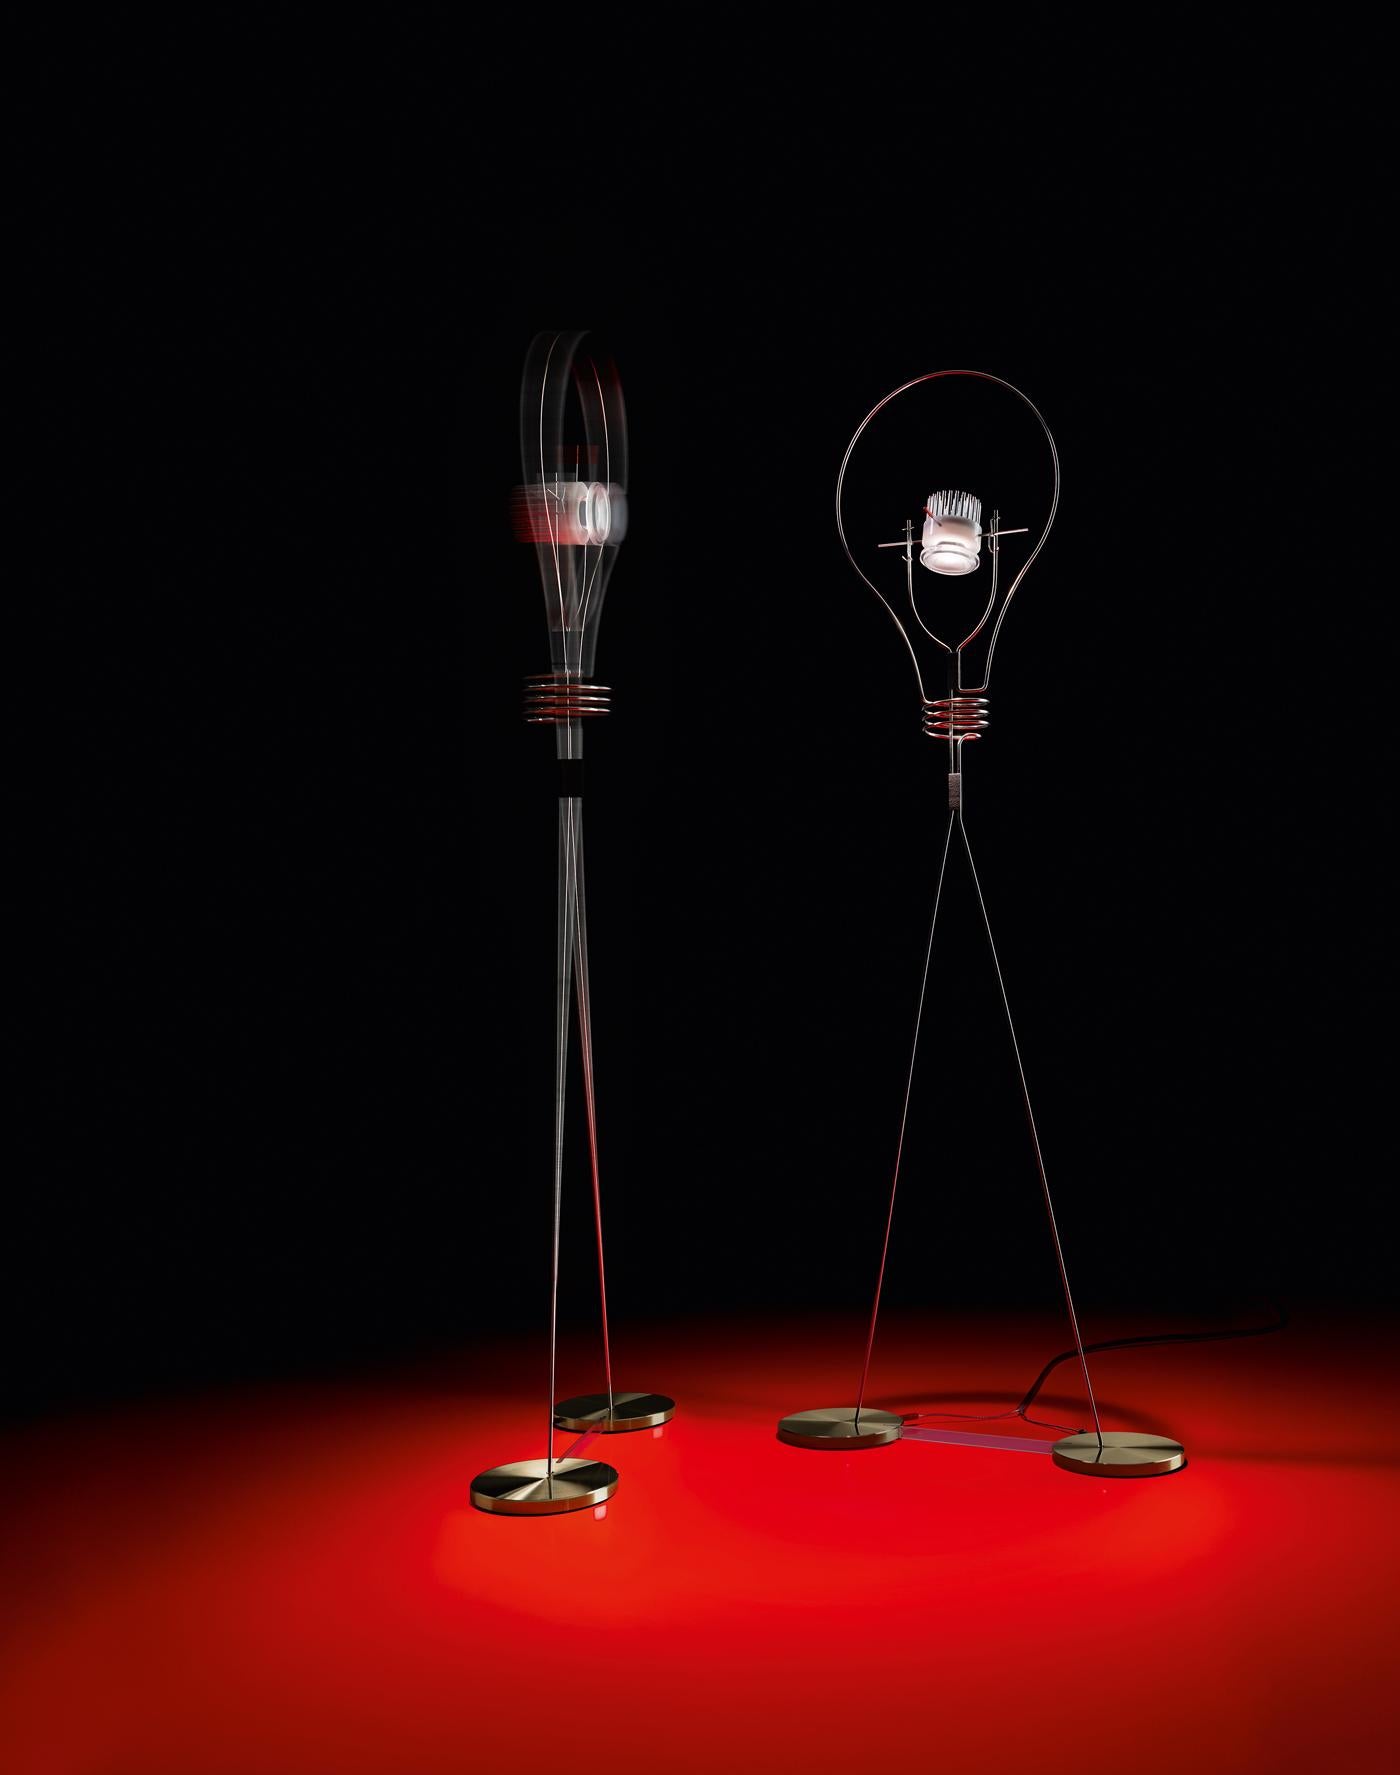 Walking bulb by Michel Sempels 2015.

Walking bulb combines the unique, magical beauty of the incandescent bulb with cutting-edge LED technology. It is slender and light, made of a stainless steel wire. Walking Bulb seems to stride forward,